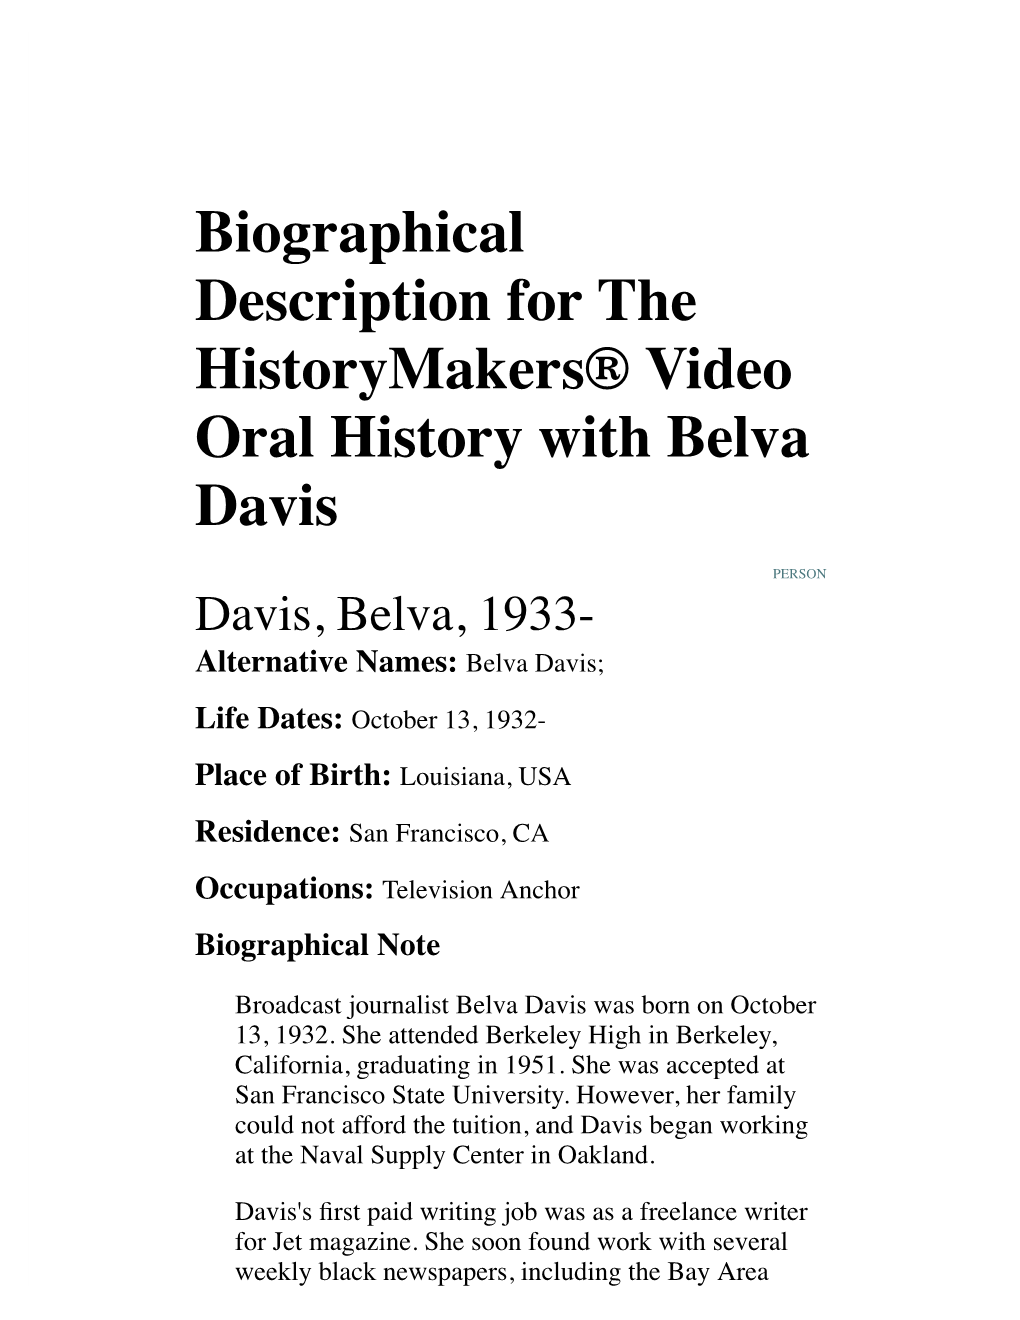 Biographical Description for the Historymakers® Video Oral History with Belva Davis